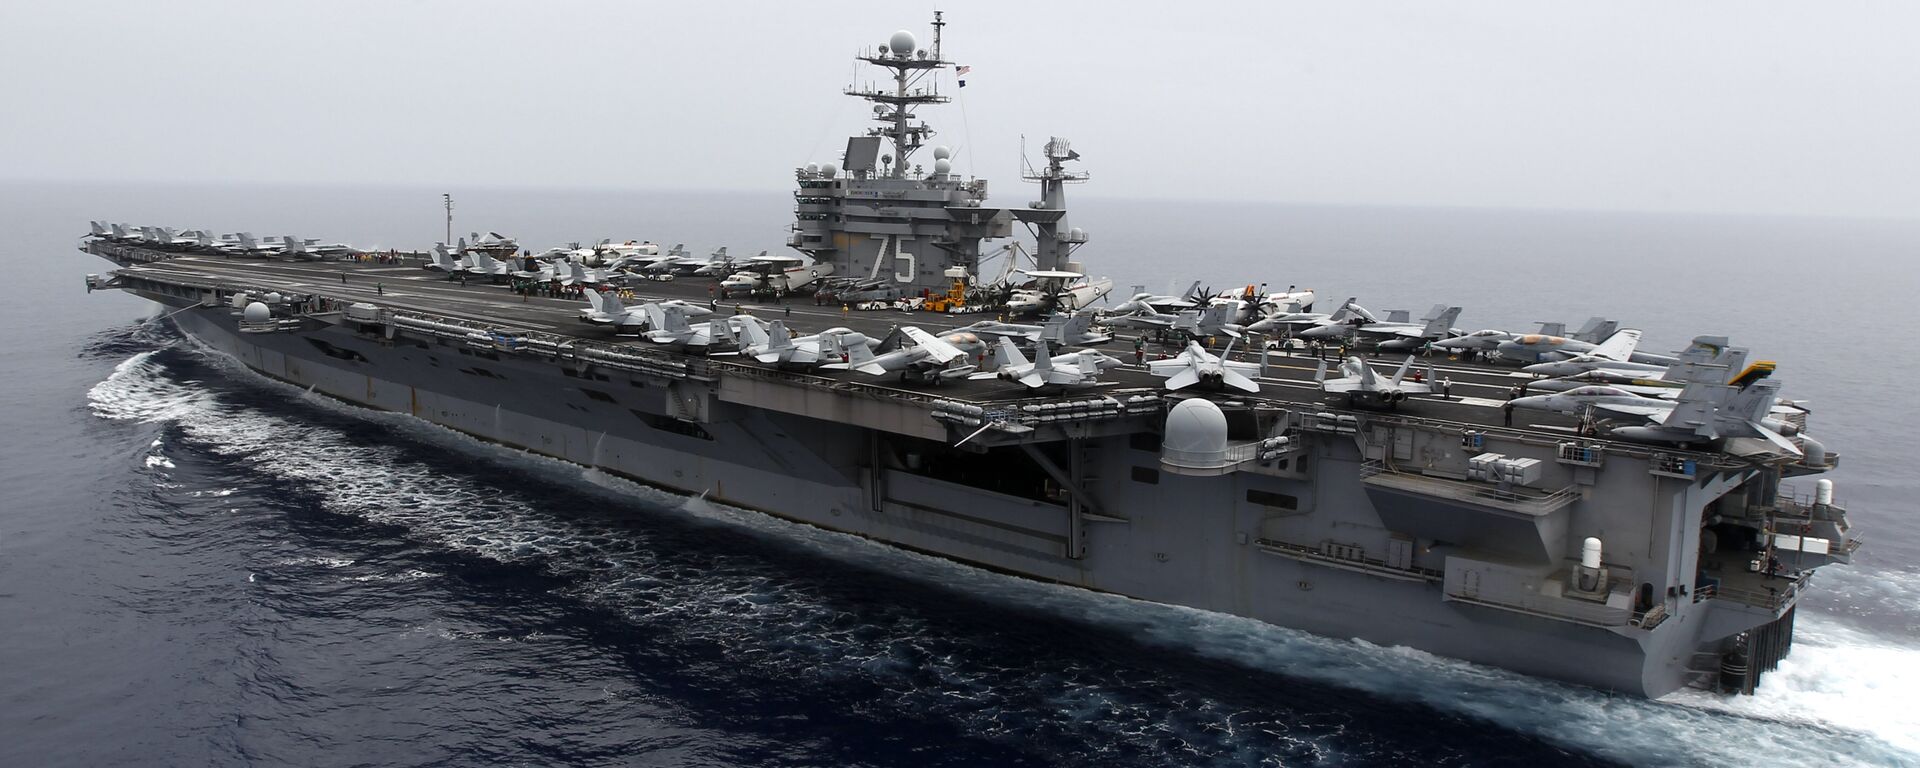 A general view shows the nuclear-powered aircraft carrier USS Harry S. Truman at an undisclosed position in the Mediterranean Sea, south of Sicily, Monday June 14, 2010 - Sputnik International, 1920, 22.03.2022